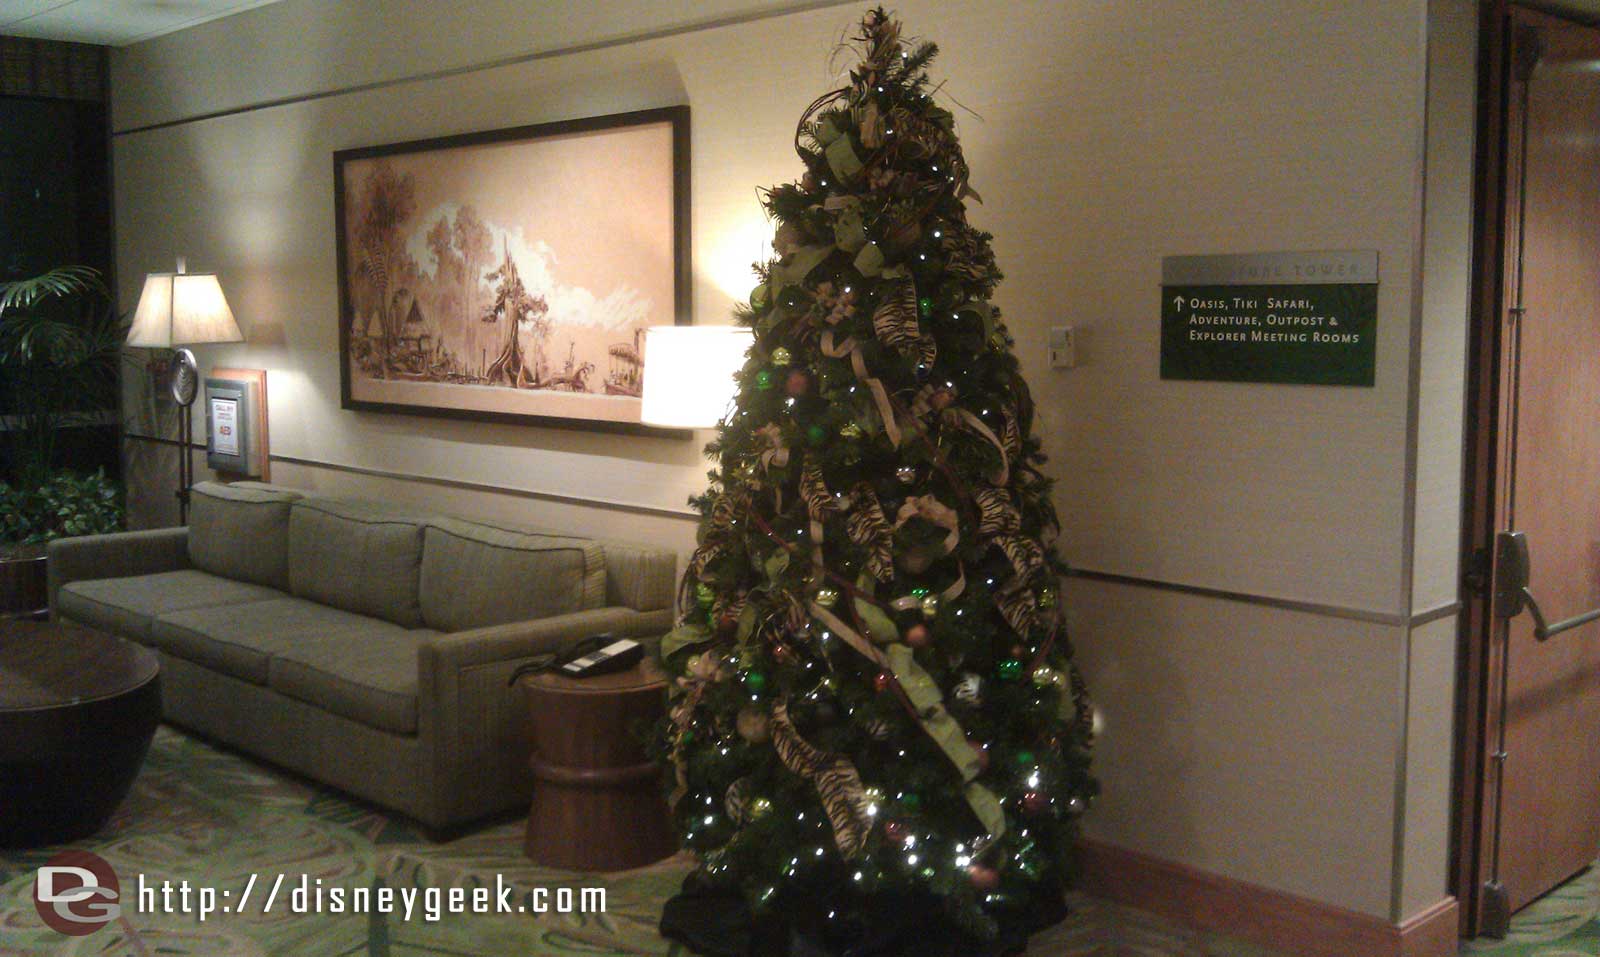 To round out my lobby tour the small tree in the Adventure Tower lobby.